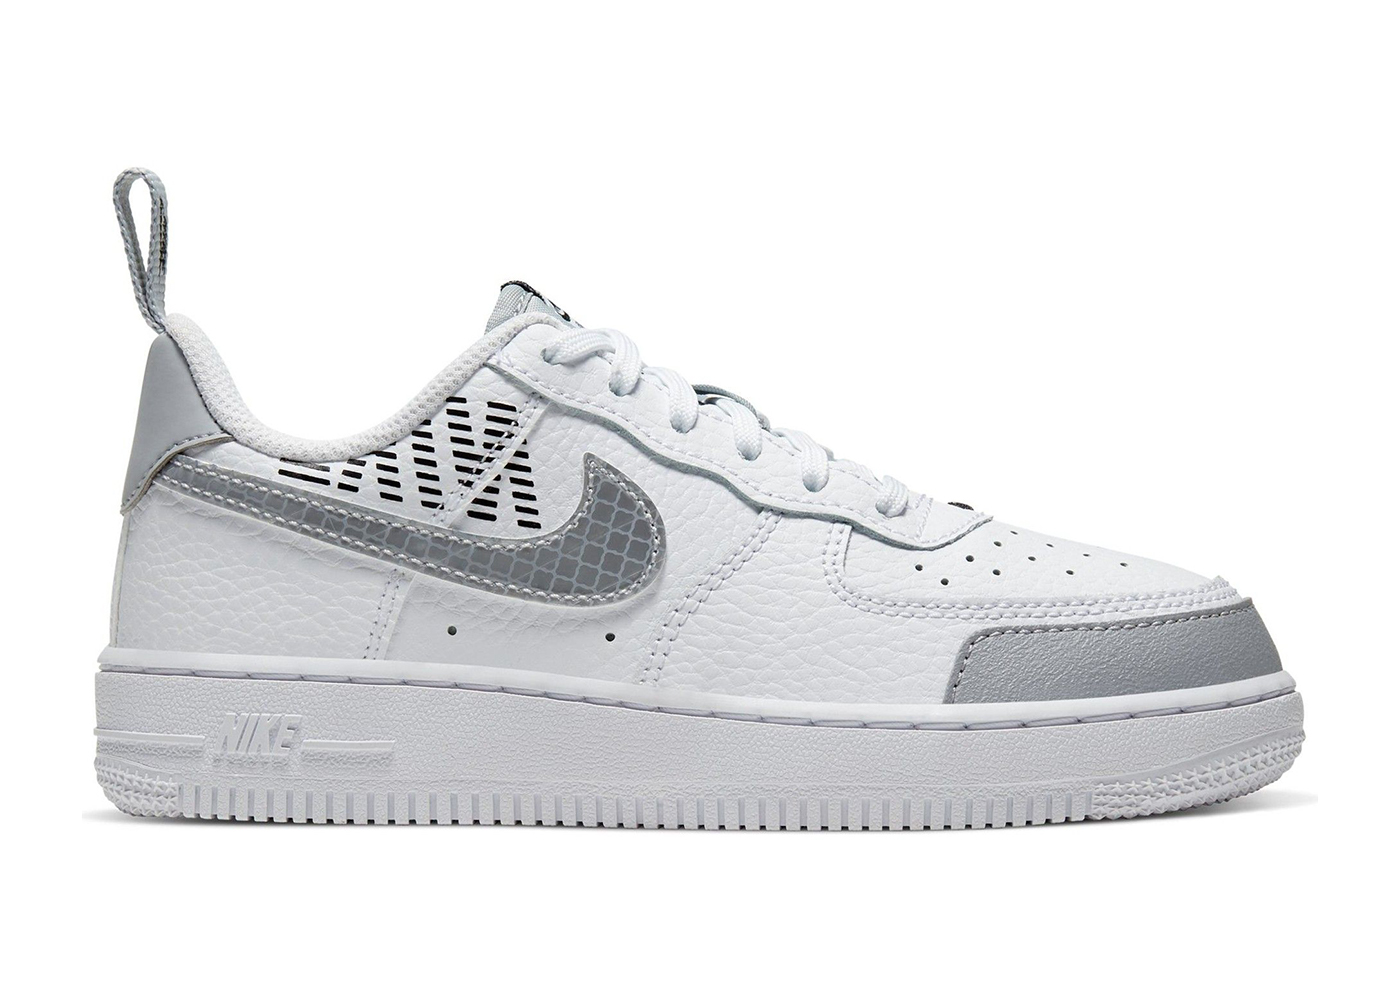 Nike Air Force 1 Low 07 LV8 White Wolf Grey Black (PS) Kids 